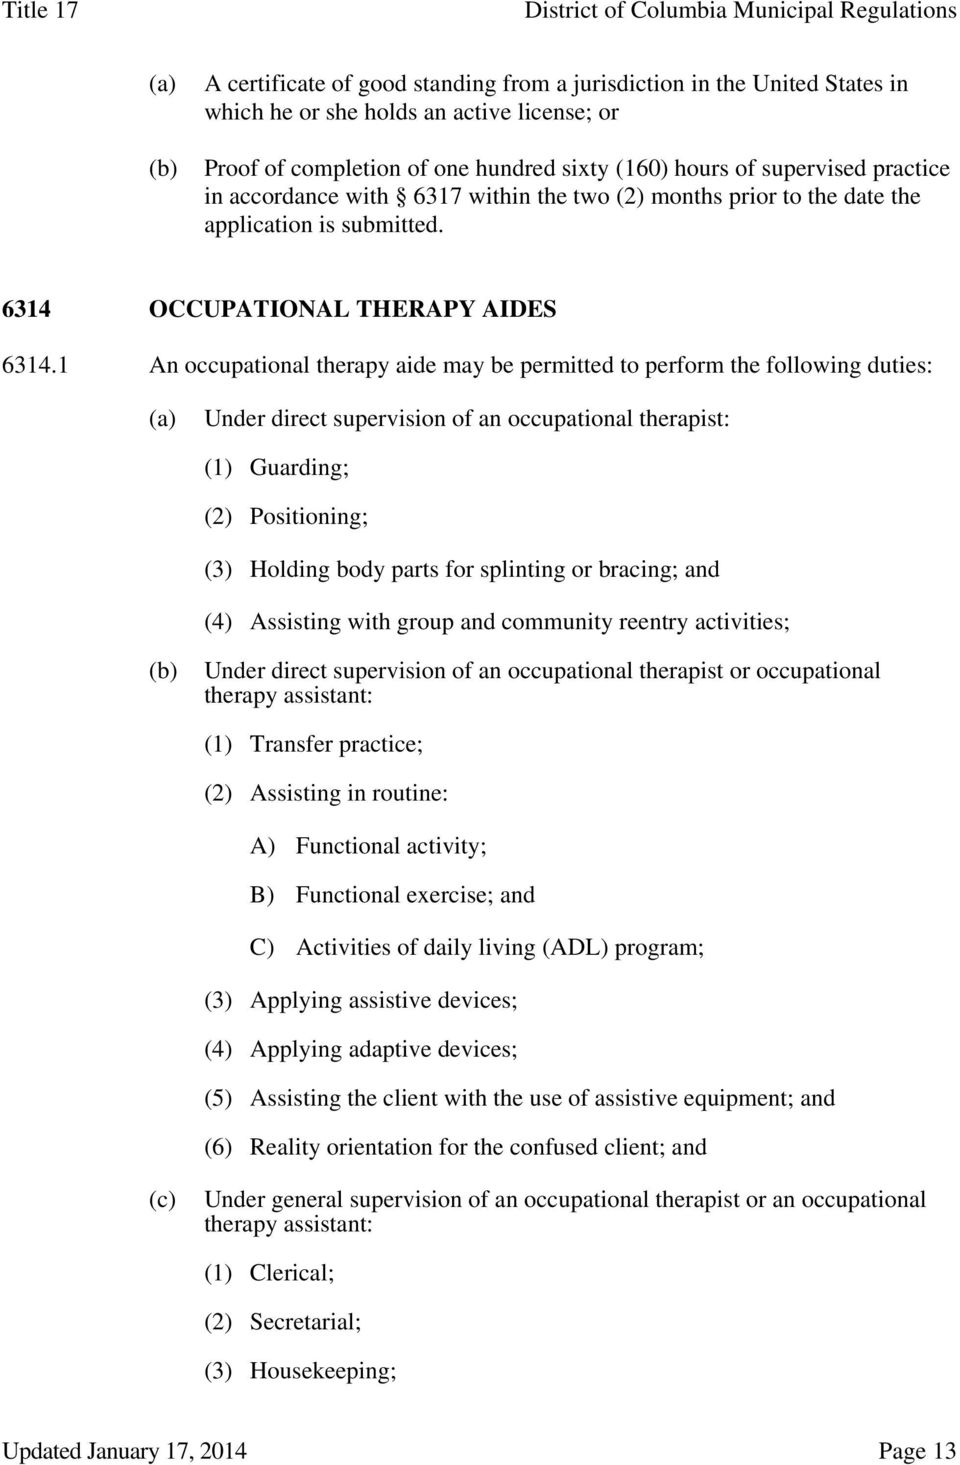 1 An occupational therapy aide may be permitted to perform the following duties: Under direct supervision of an occupational therapist: (1) Guarding; (2) Positioning; (3) Holding body parts for